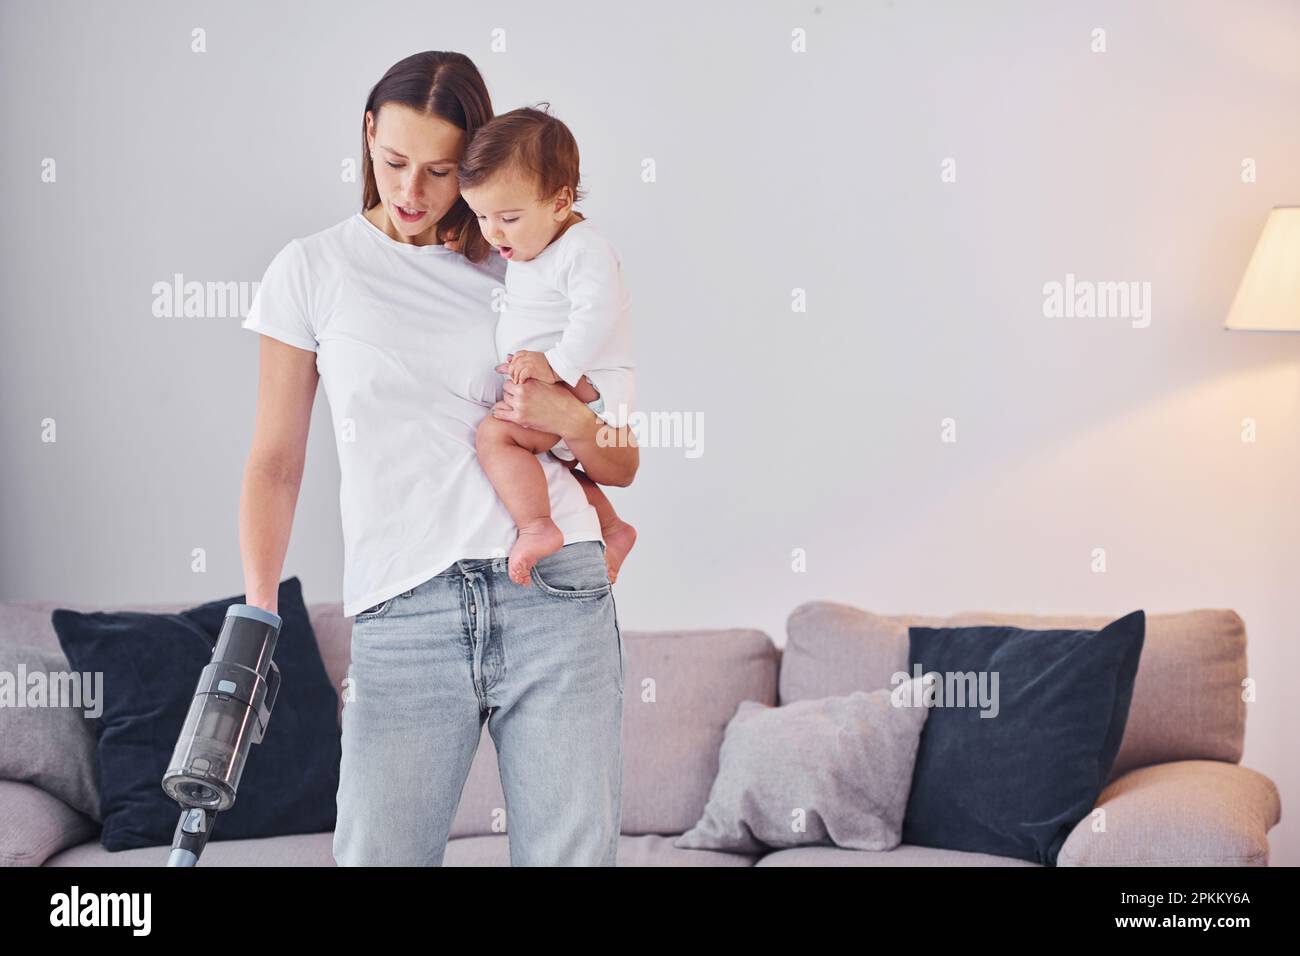 Woman uses vacuum cleaner. Mother with her little daughter is indoors at home together. Stock Photo